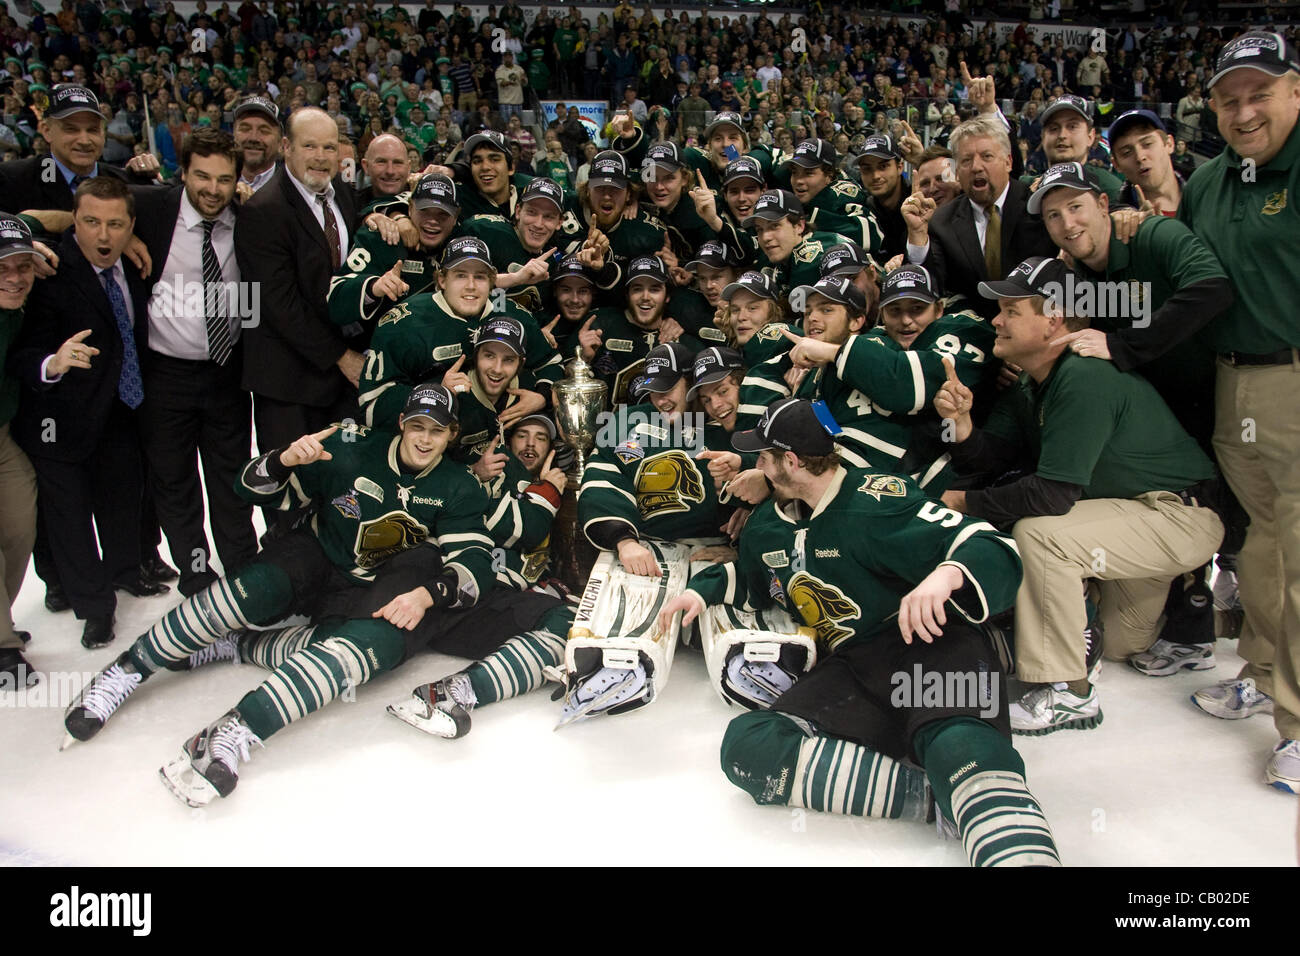 London Ontario, Canada - May 11, 2012. The London Knights defeated the Niagara Icedogs 2 -1 to win the Ontario Hockey League Championship series 4 - 1. The Knights will now play for the national title, The Memorial Cup in Shawinigan Quebec starting on May 18, 2012. Stock Photo